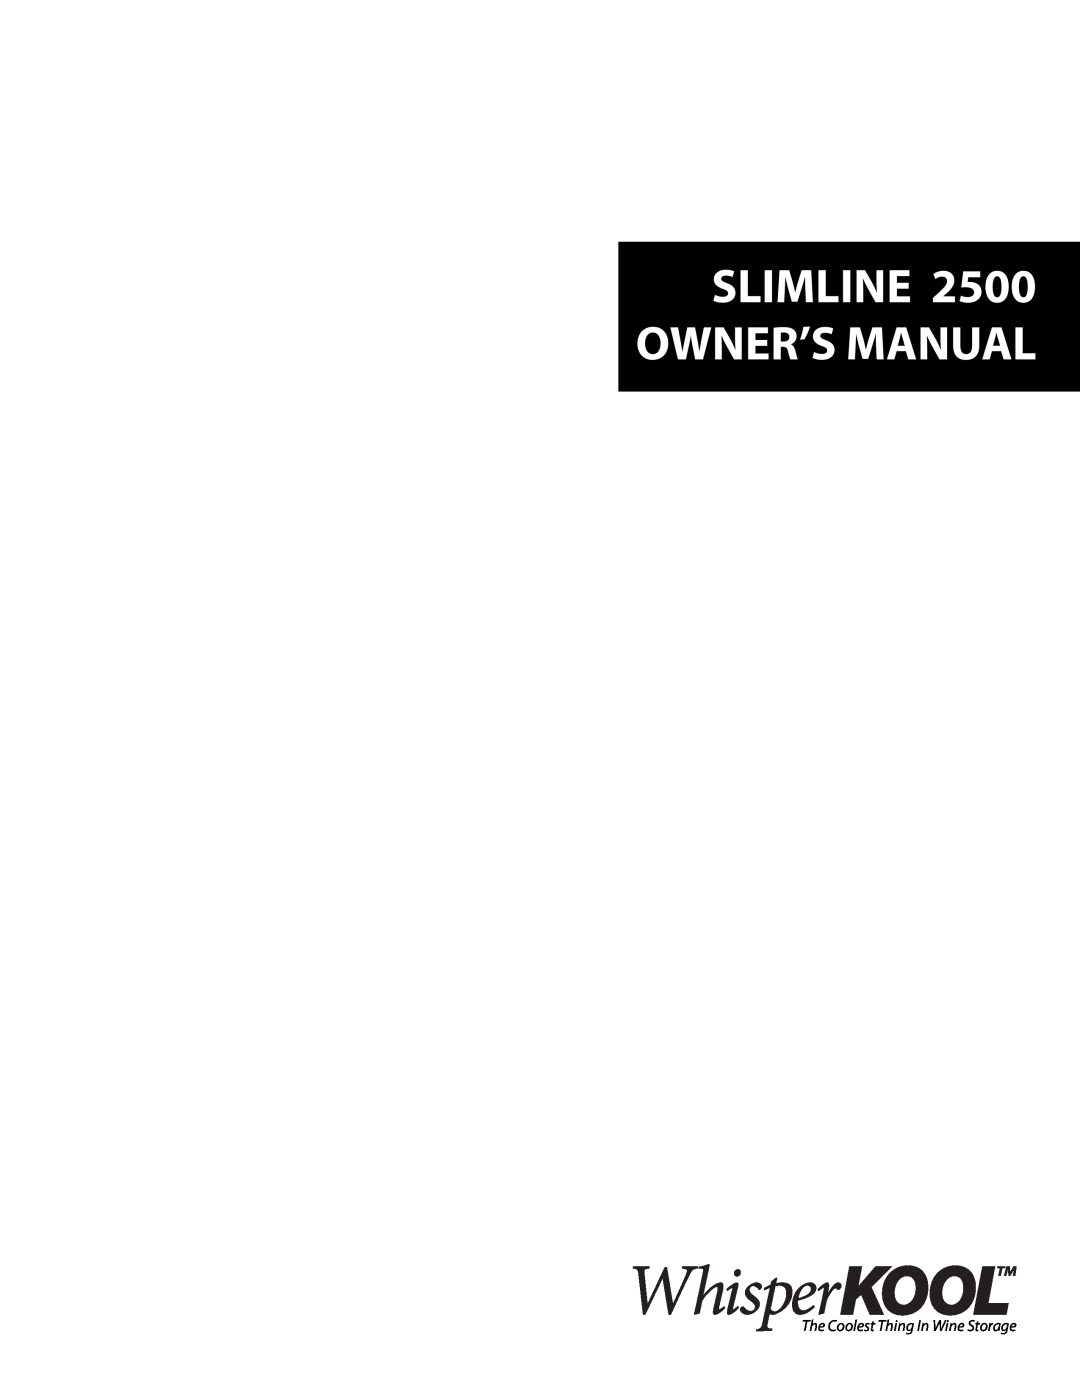 WhisperKool manual SLIMLINE 2500 OWNER’S MANUAL, The Coolest Thing In Wine Storage 